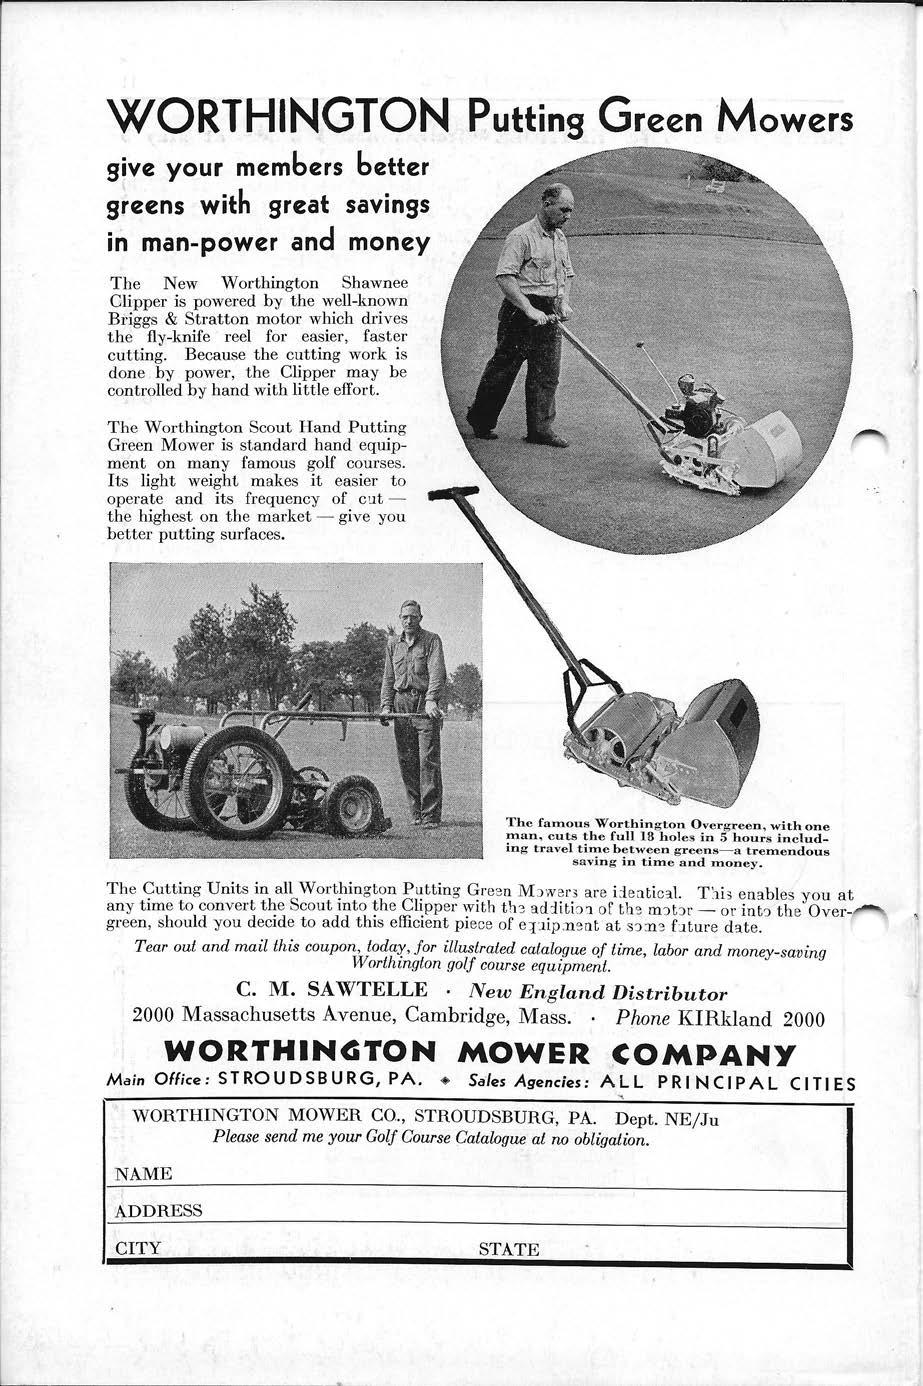 WORTHINGTON give your members better greens with great savings in man-power and money Putting Green Mowers The New Worthington Shawnee Clipper is powered by the well-known Briggs & Stratton motor